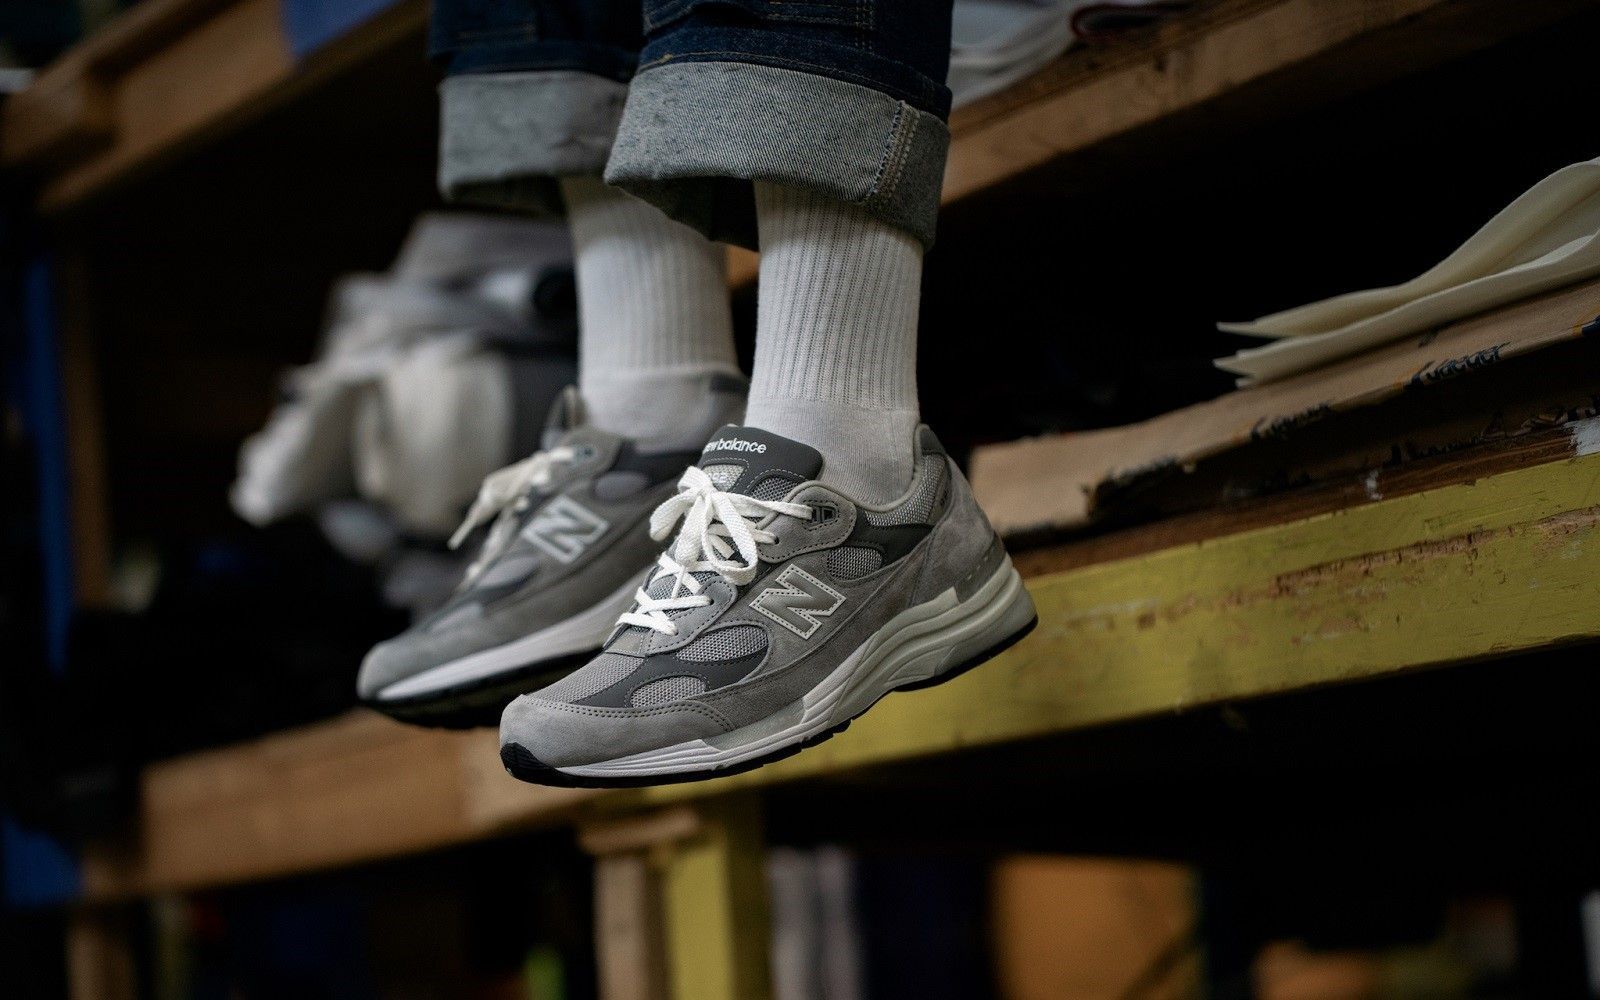 The return of the New Balance 992 